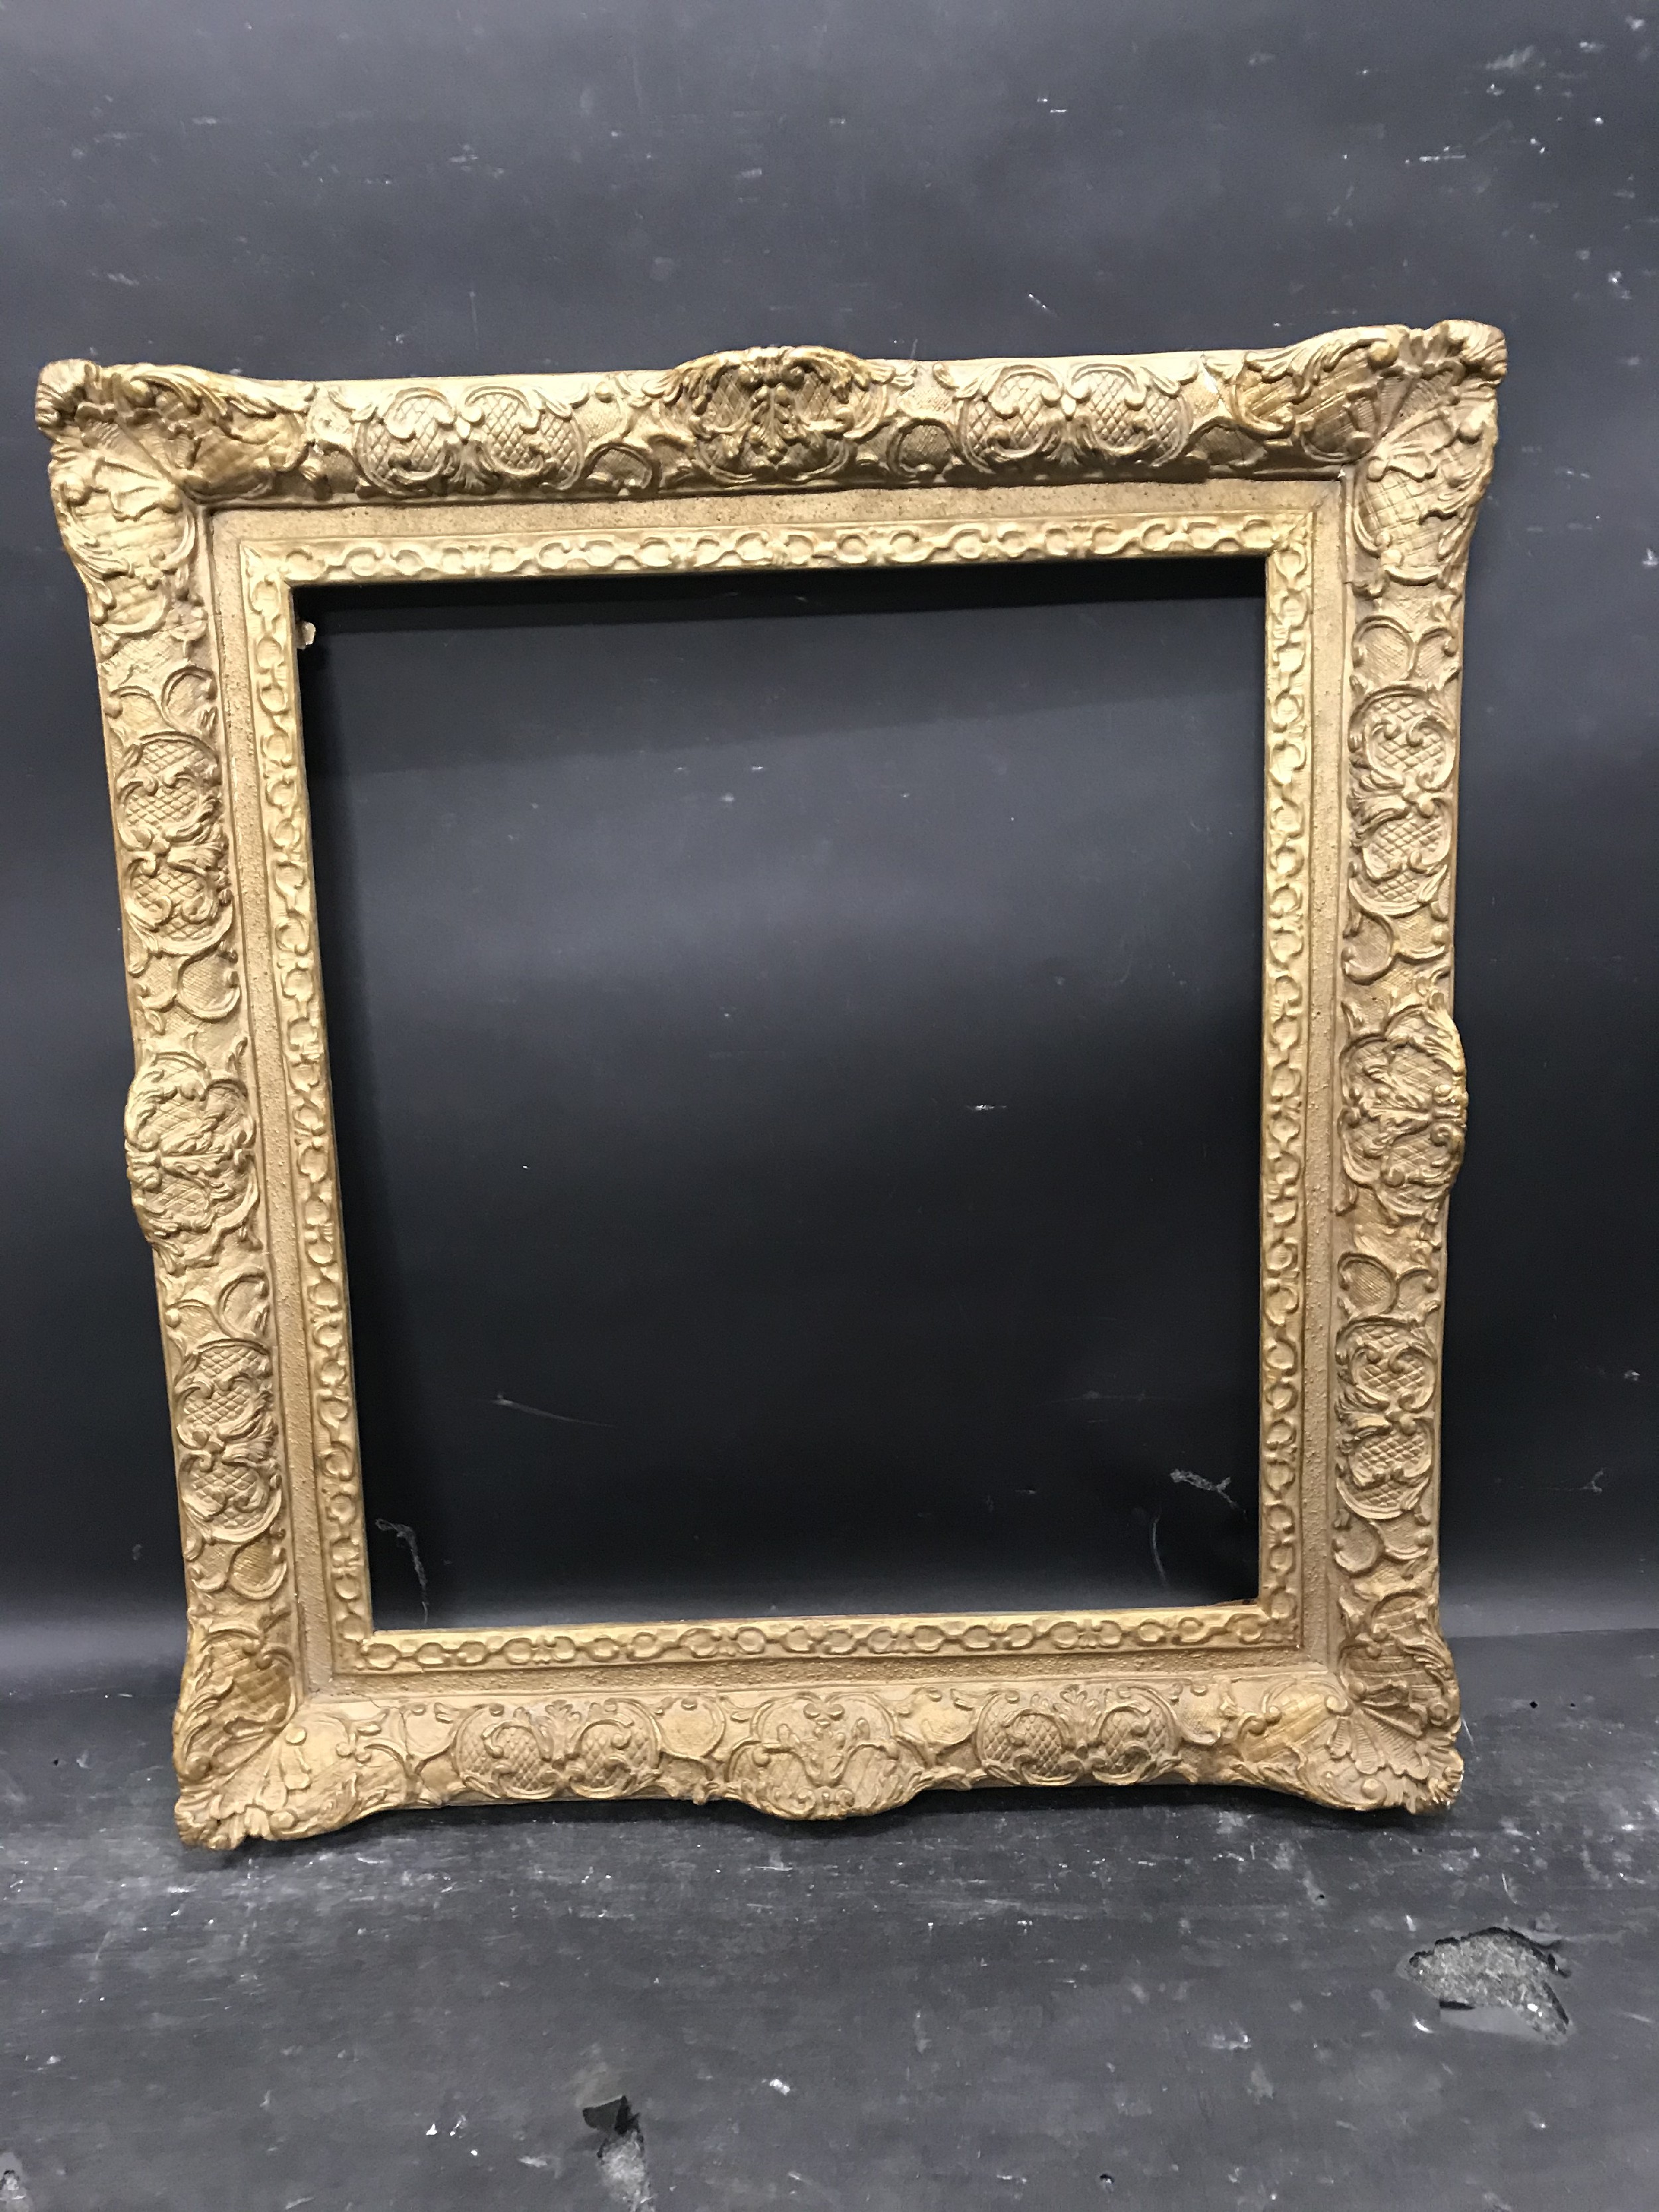 20th Century English School. A Gilt Composition Frame, with swept centres and corners, 19.25" x 16. - Image 2 of 3